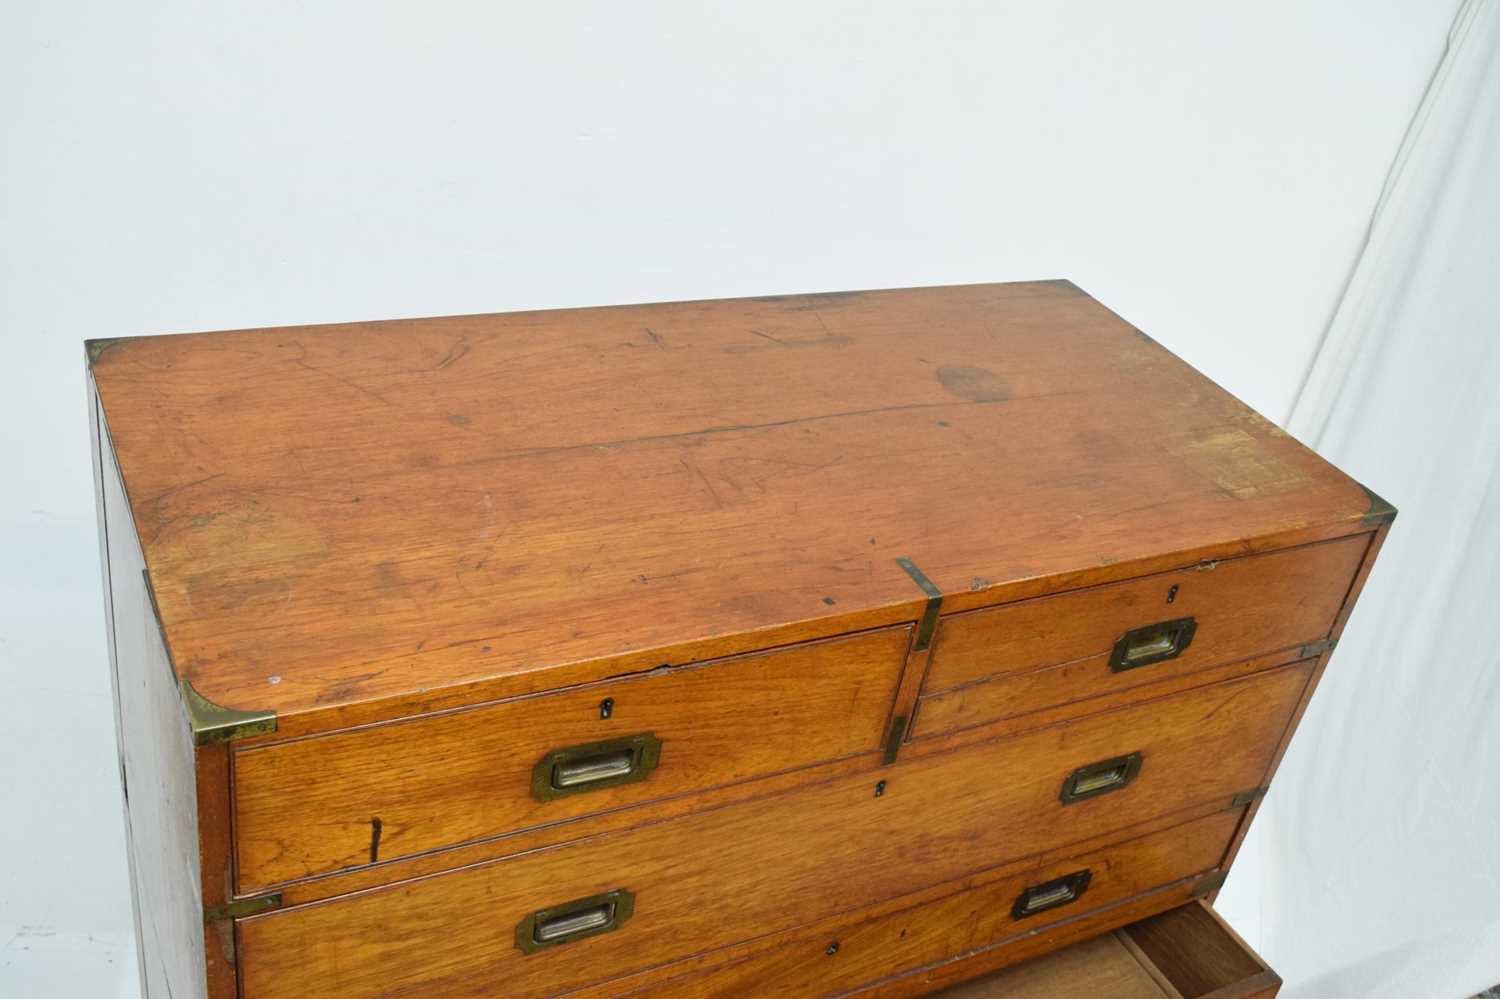 Late 19th century brass-bound teak campaign secretaire chest - Image 14 of 16